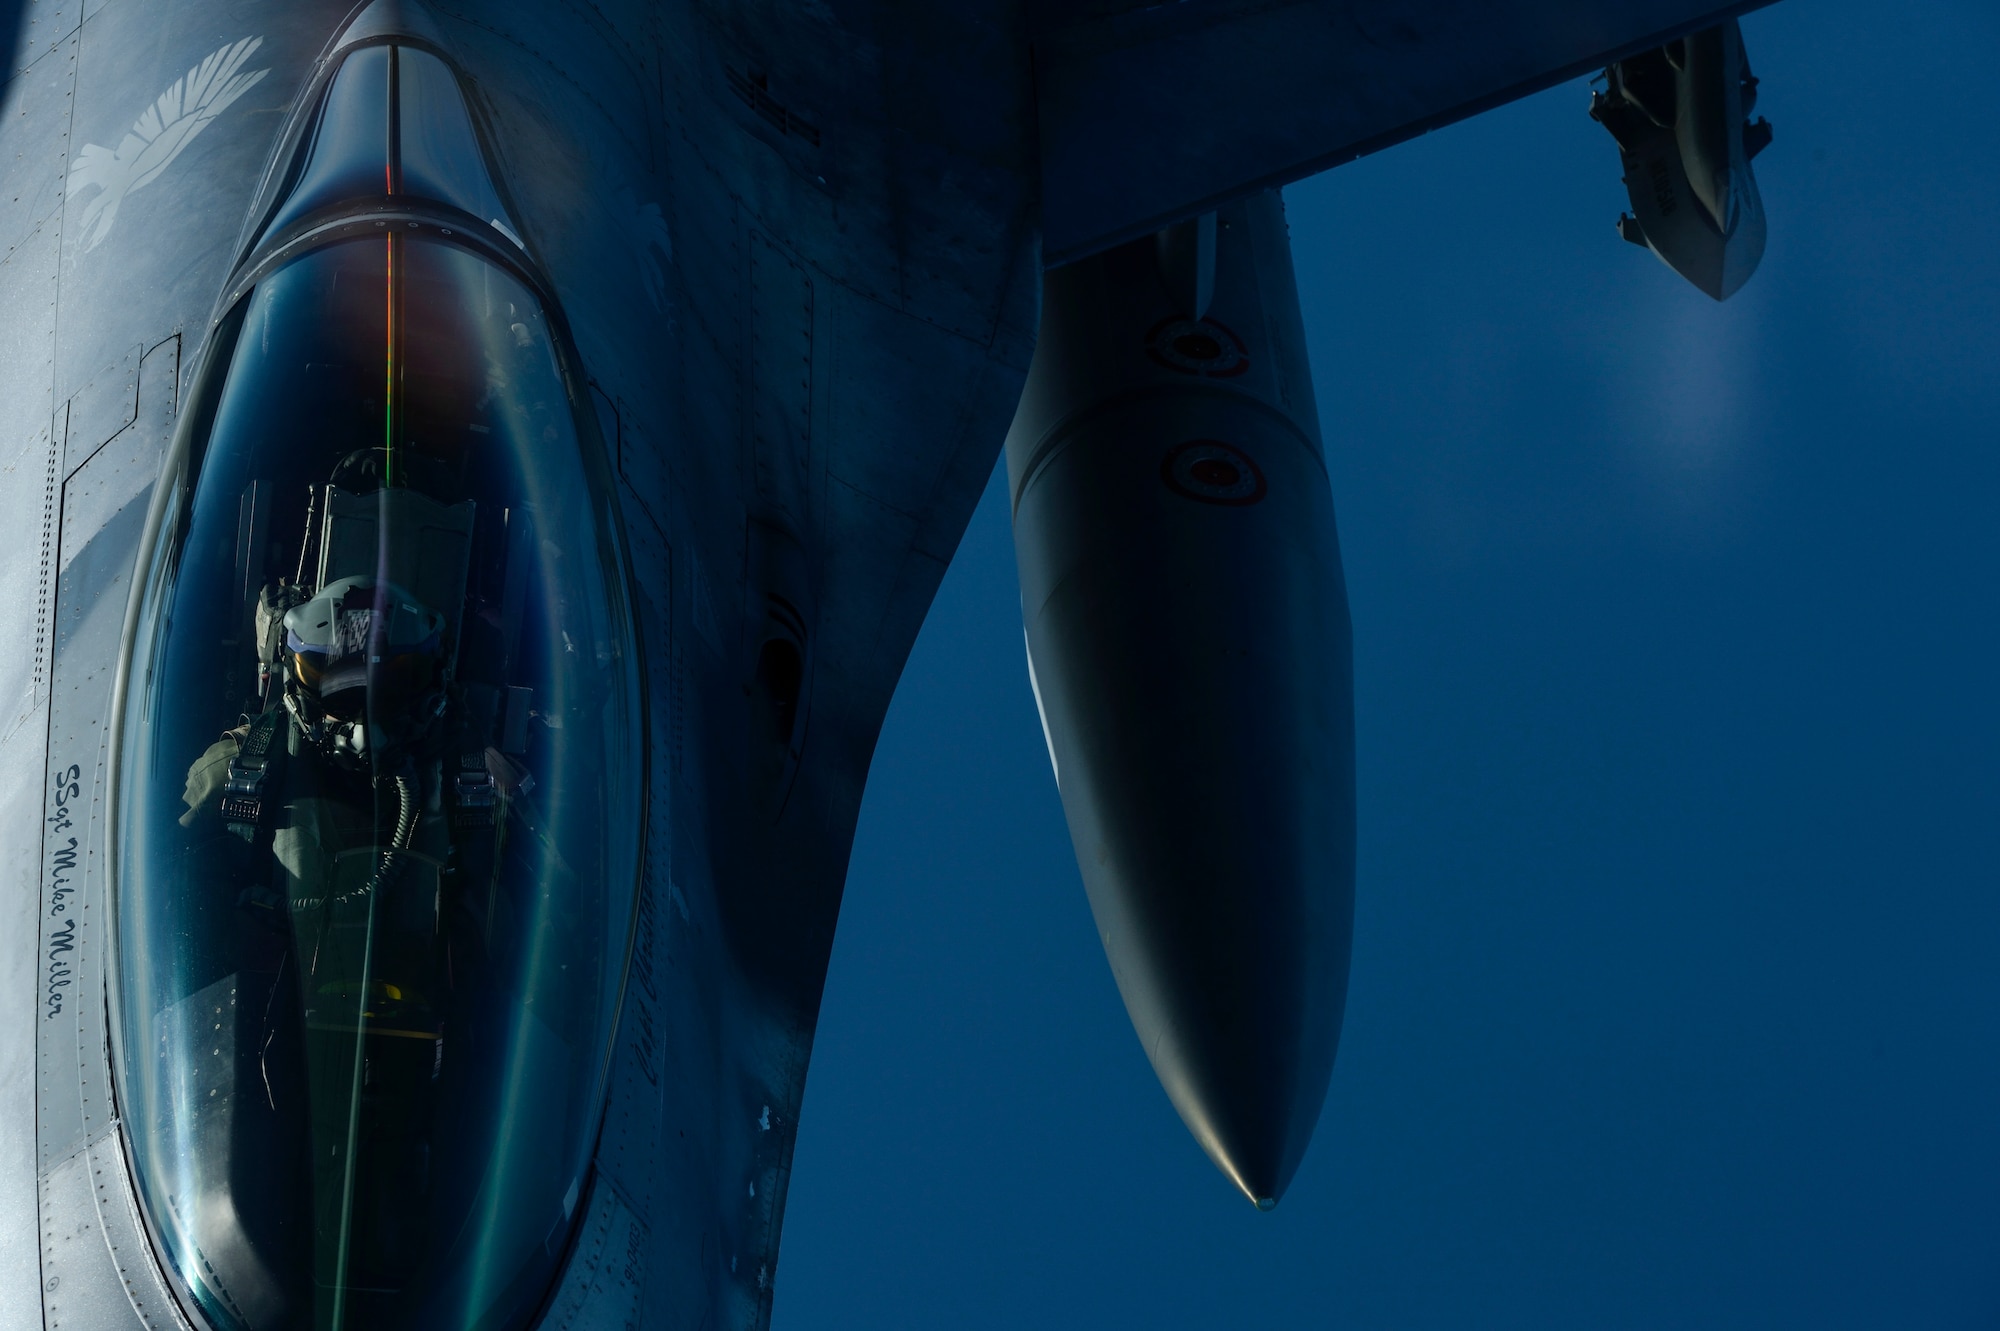 A KC-135 Stratotanker assigned to the 63rd Air Refueling Squadron, 927th Operations Group at MacDill Air Force Base, Fla., refuels an F-16 Fighting Falcon fighter aircraft assigned to the 480th Expeditionary Fighter Squadron, Spangdahlem Air Base, Germany, during a flying training deployment at Souda Bay, Greece, Feb. 2, 2016. The KC-135 extends the operational range and mission capabilities of the F-16 during the FTD. (U.S. Air Force photo by Staff Sgt. Christopher Ruano/Released)